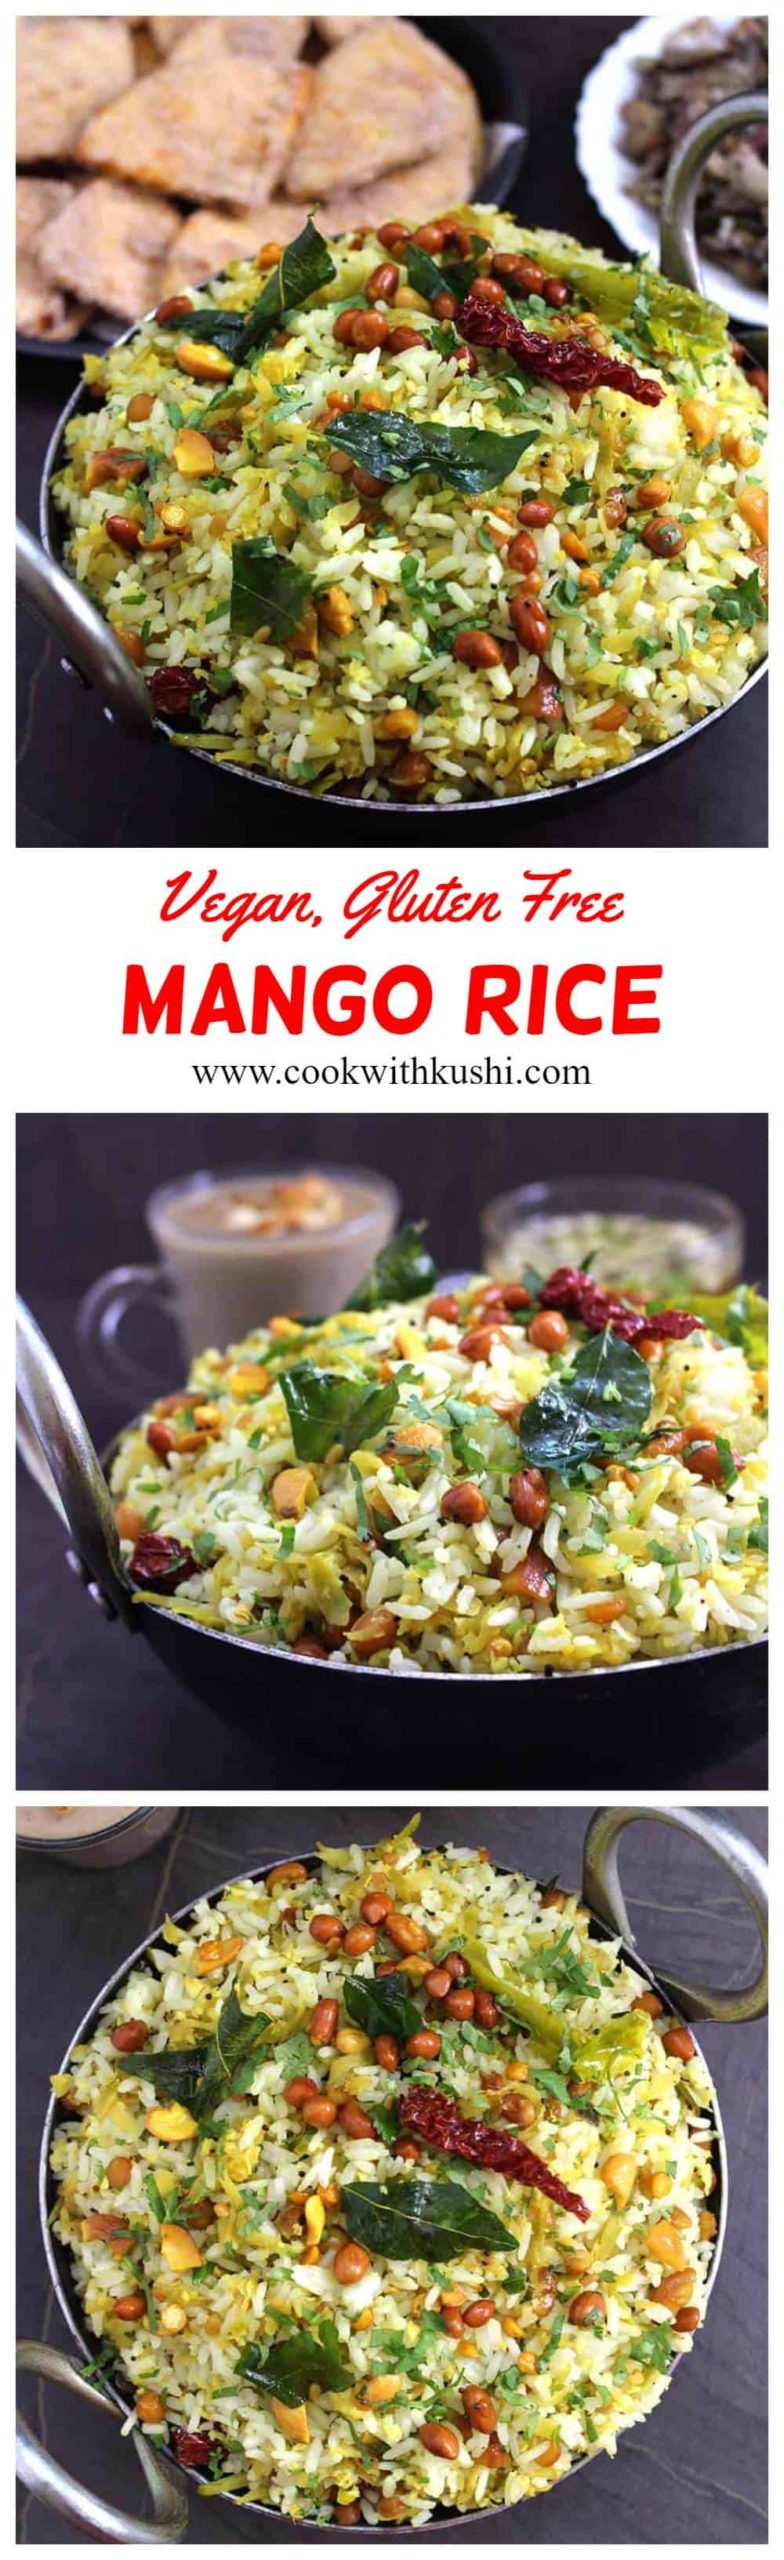 Mango Rice or Mavinakayi Chitranna is a easy to make and delicious,  addictive  rice recipe prepared using raw sour mangoes. Actual highlight in this dish is flavor of the mangoes that comes from sautéing it in oil. #thaifriedrice #mangorice #mangorecipes #friedrice #leftovers #lemonrice #chitranna #ugadi #diwali #navratri #vegetarian #vegan #glutenfree #indianrice #leftoverrice #summerfood #summerrecipes